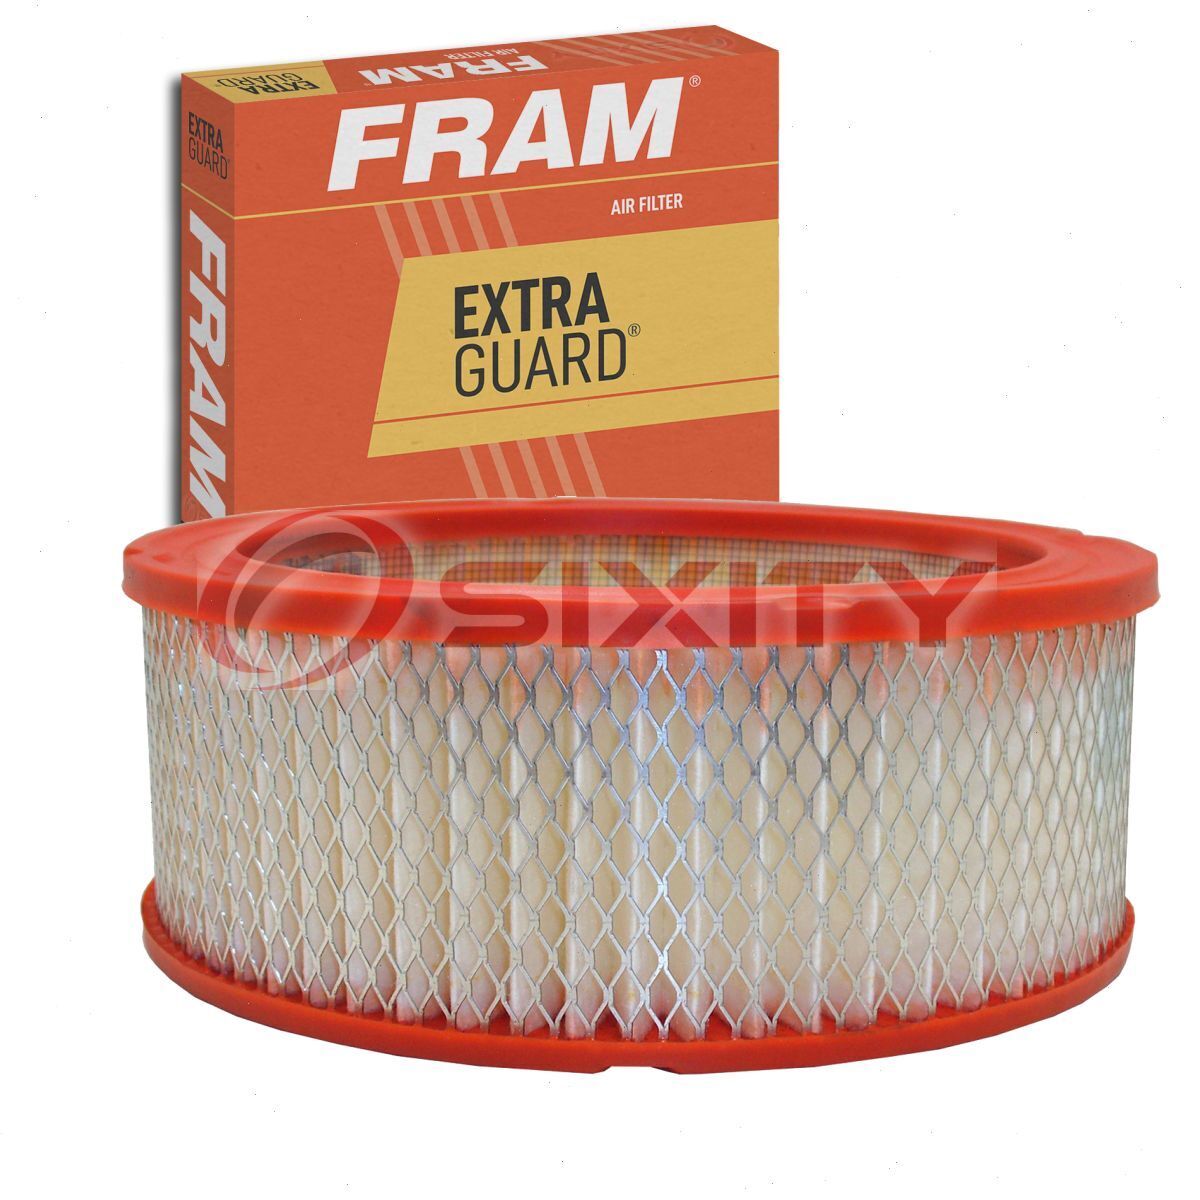 FRAM Extra Guard Air Filter for 1964-1981 Ford F-100 Intake Inlet Manifold ey